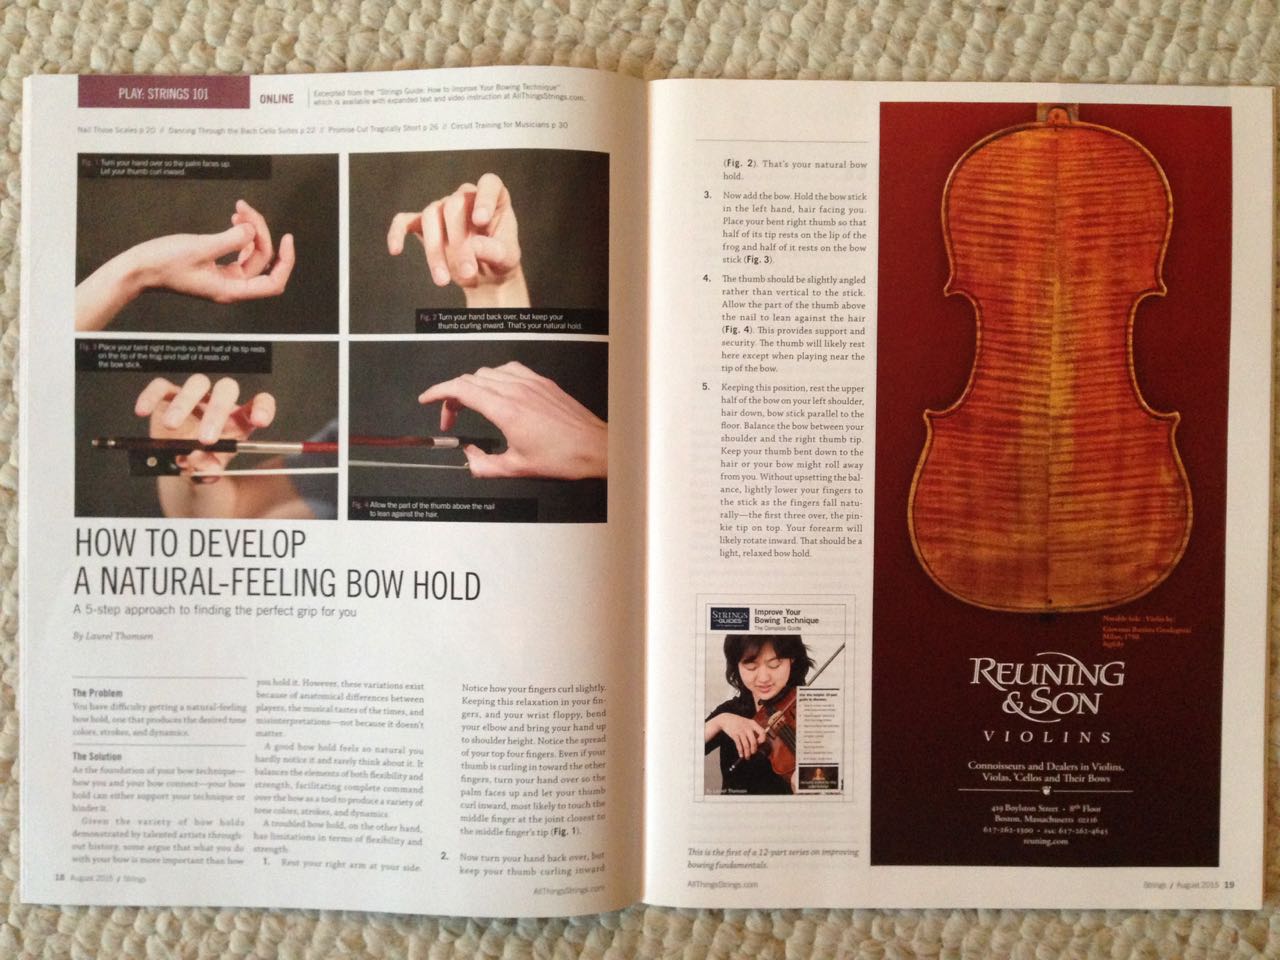 One of violinist Laurel Thomsen's articles published in Strings magazine